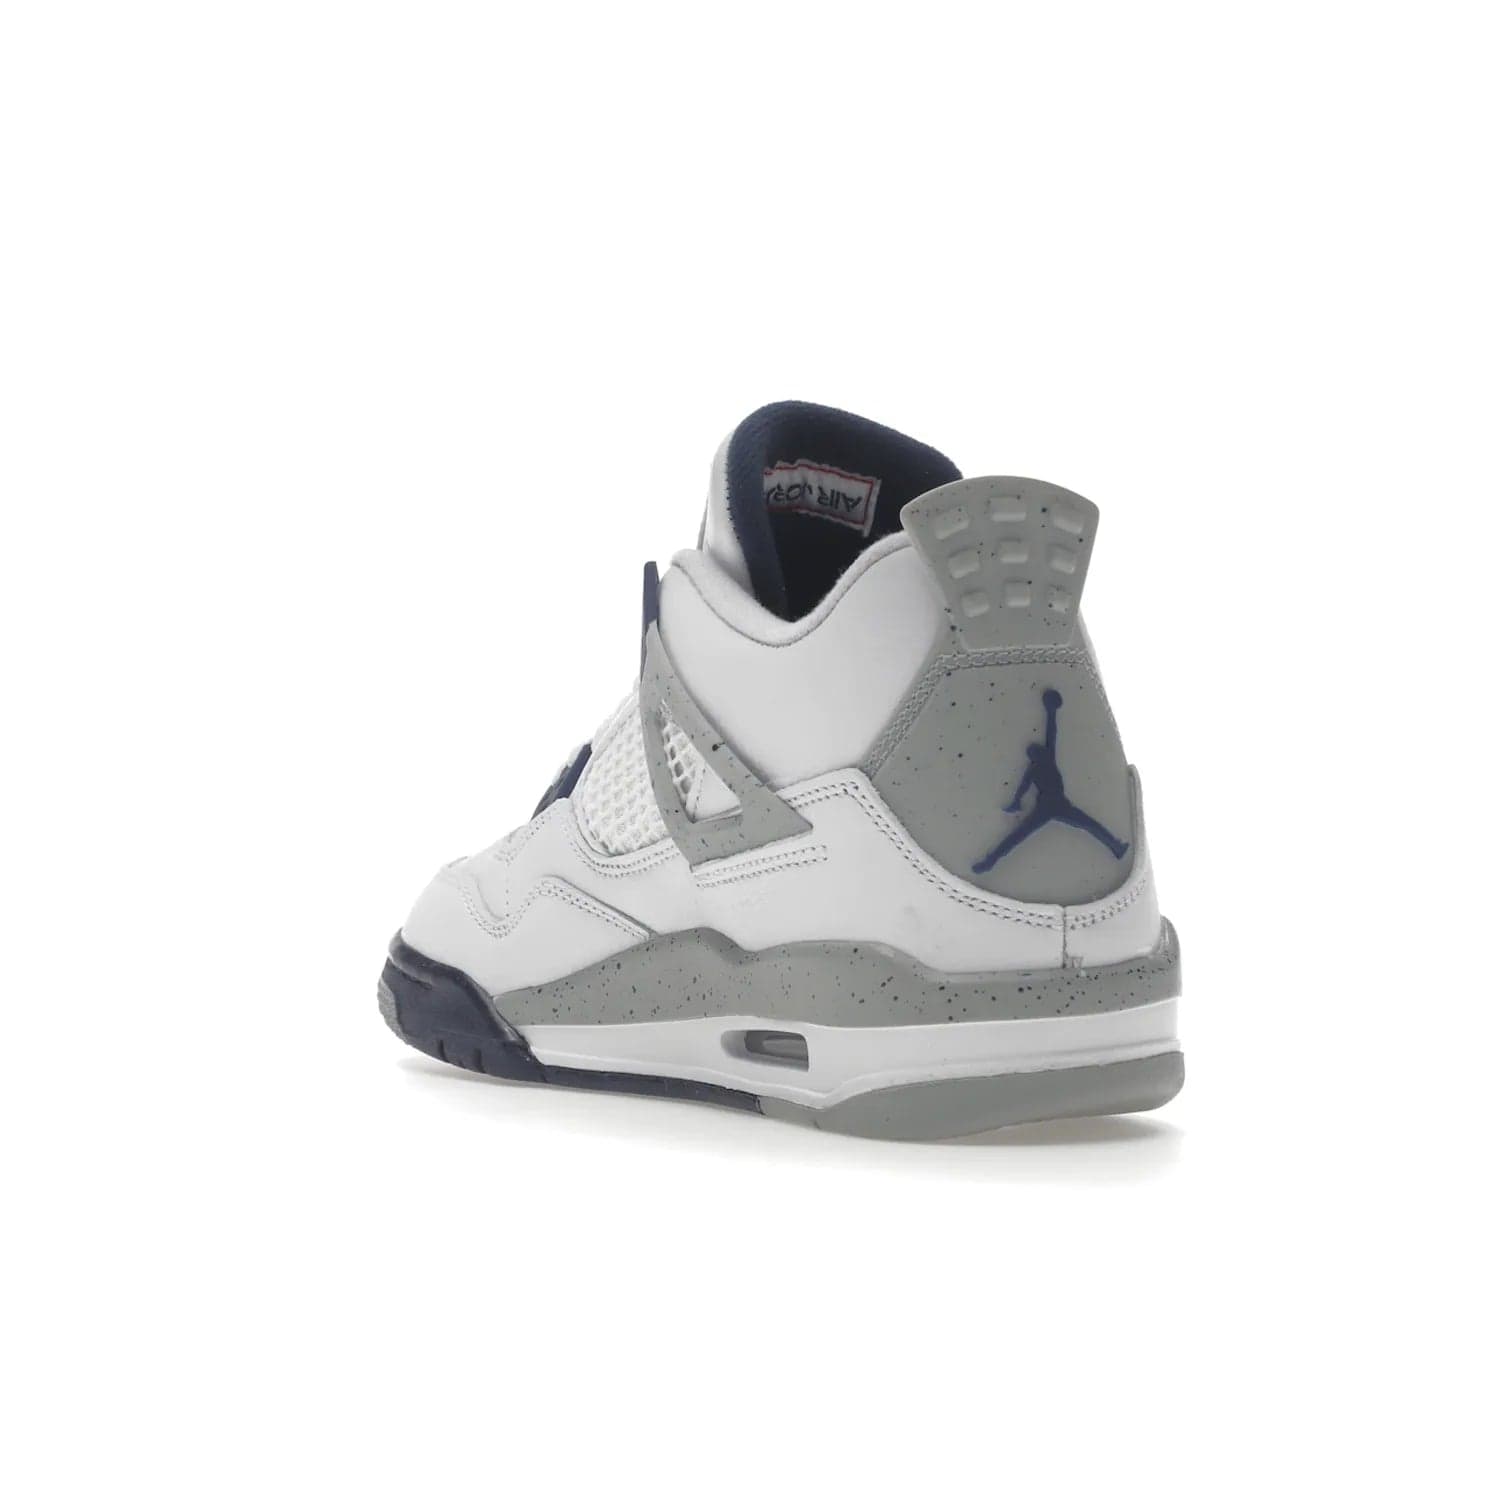 Jordan 4 Retro Midnight Navy (GS) - Image 25 - Only at www.BallersClubKickz.com - Shop the Air Jordan 4 Retro Midnight Navy GS. The white leather upper features black support wings & heel tab, navy eyelets & woven tongue tag with Jumpman logos. The midsole features two-tone polyurethane insole & AIR units in the heel & forefoot. Get the white/midnight navy/light smoke grey/fire colorway & show off your style.